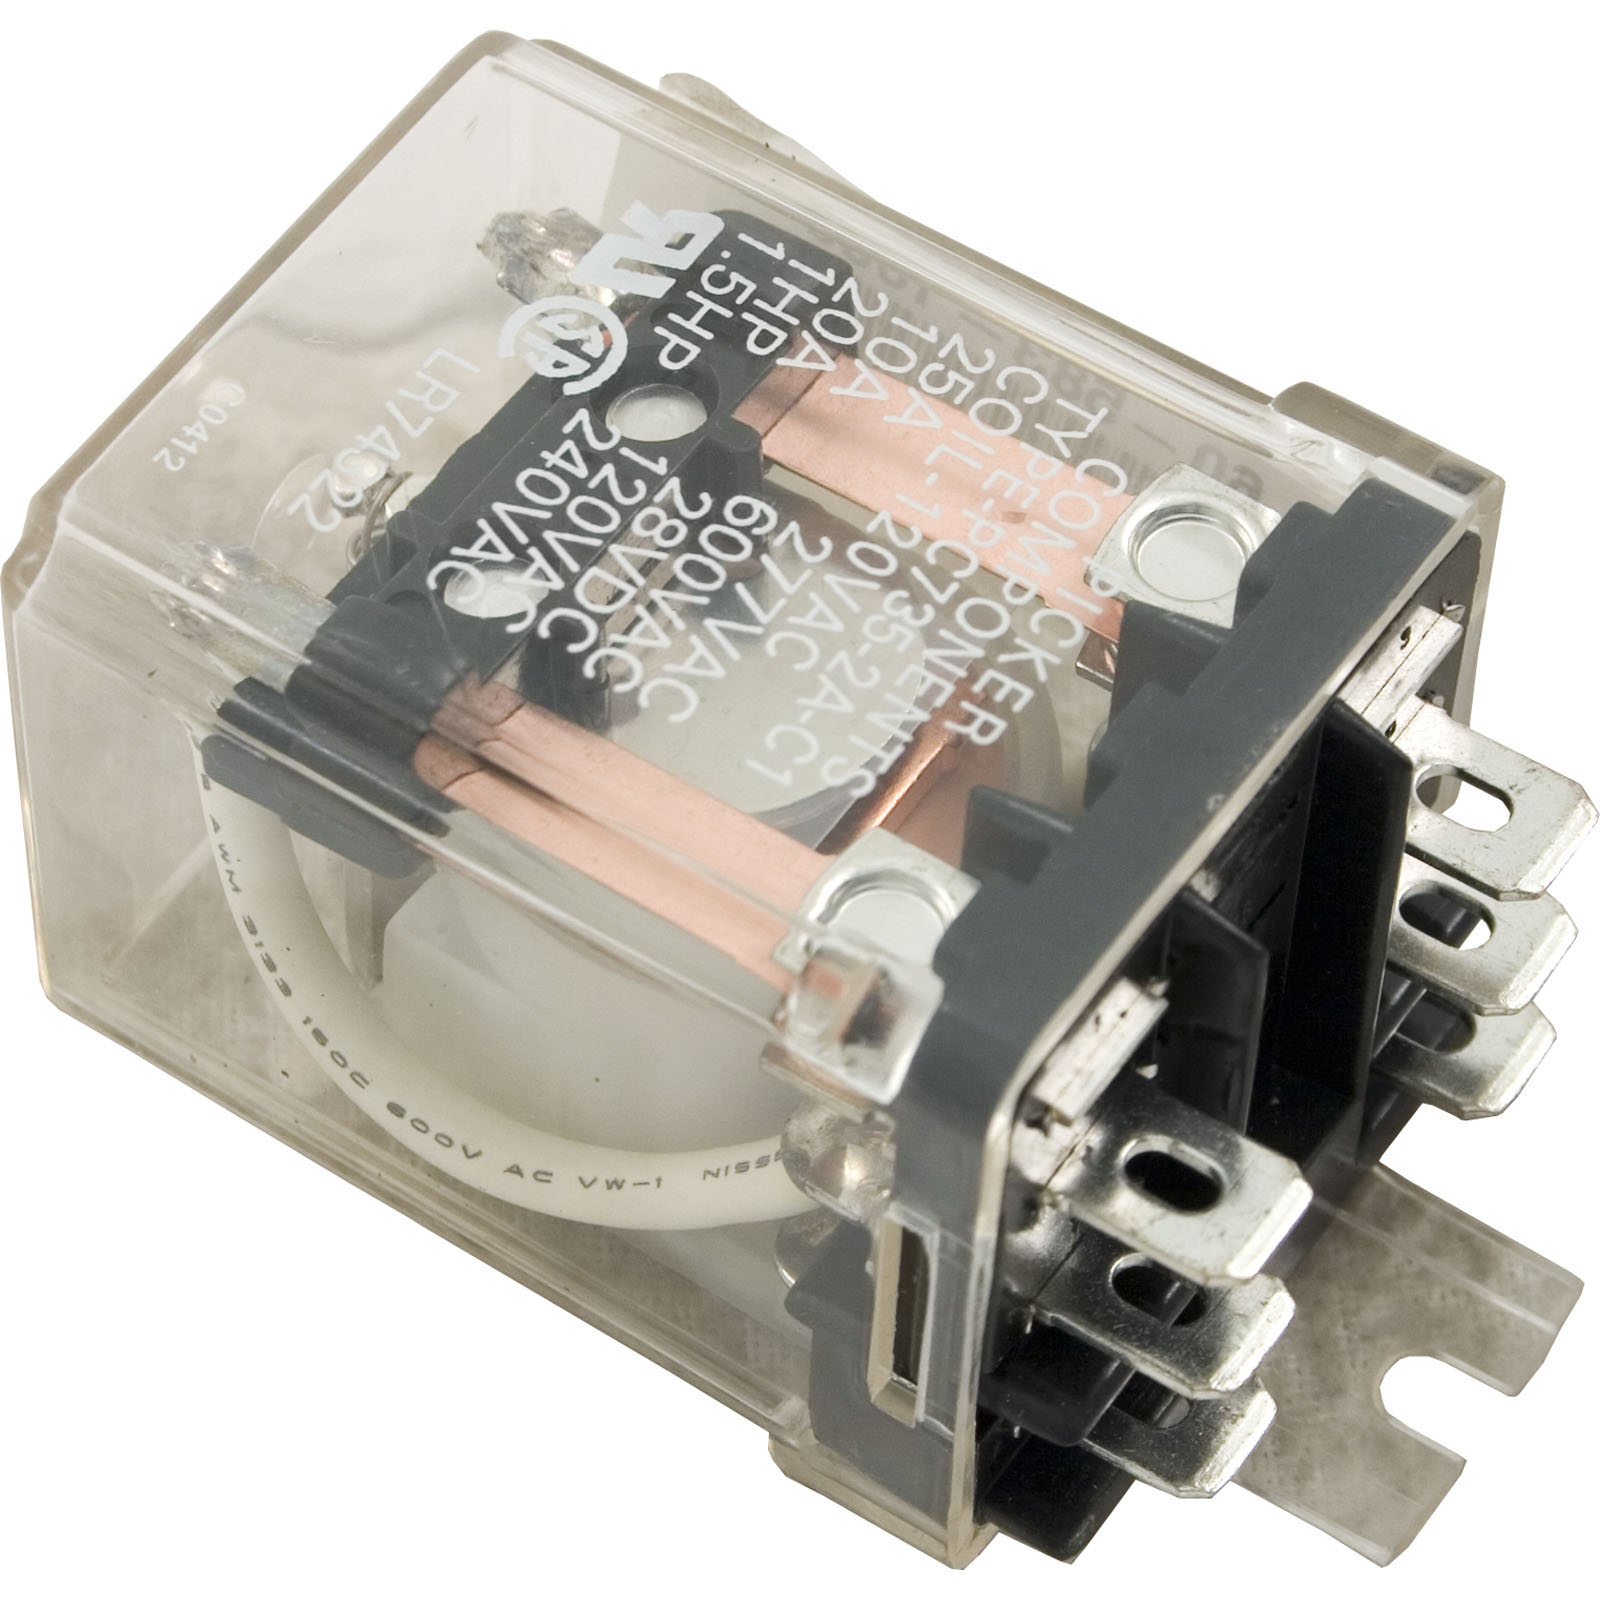 Picture of  Relay DPST 25A 115v Coil Dustcover